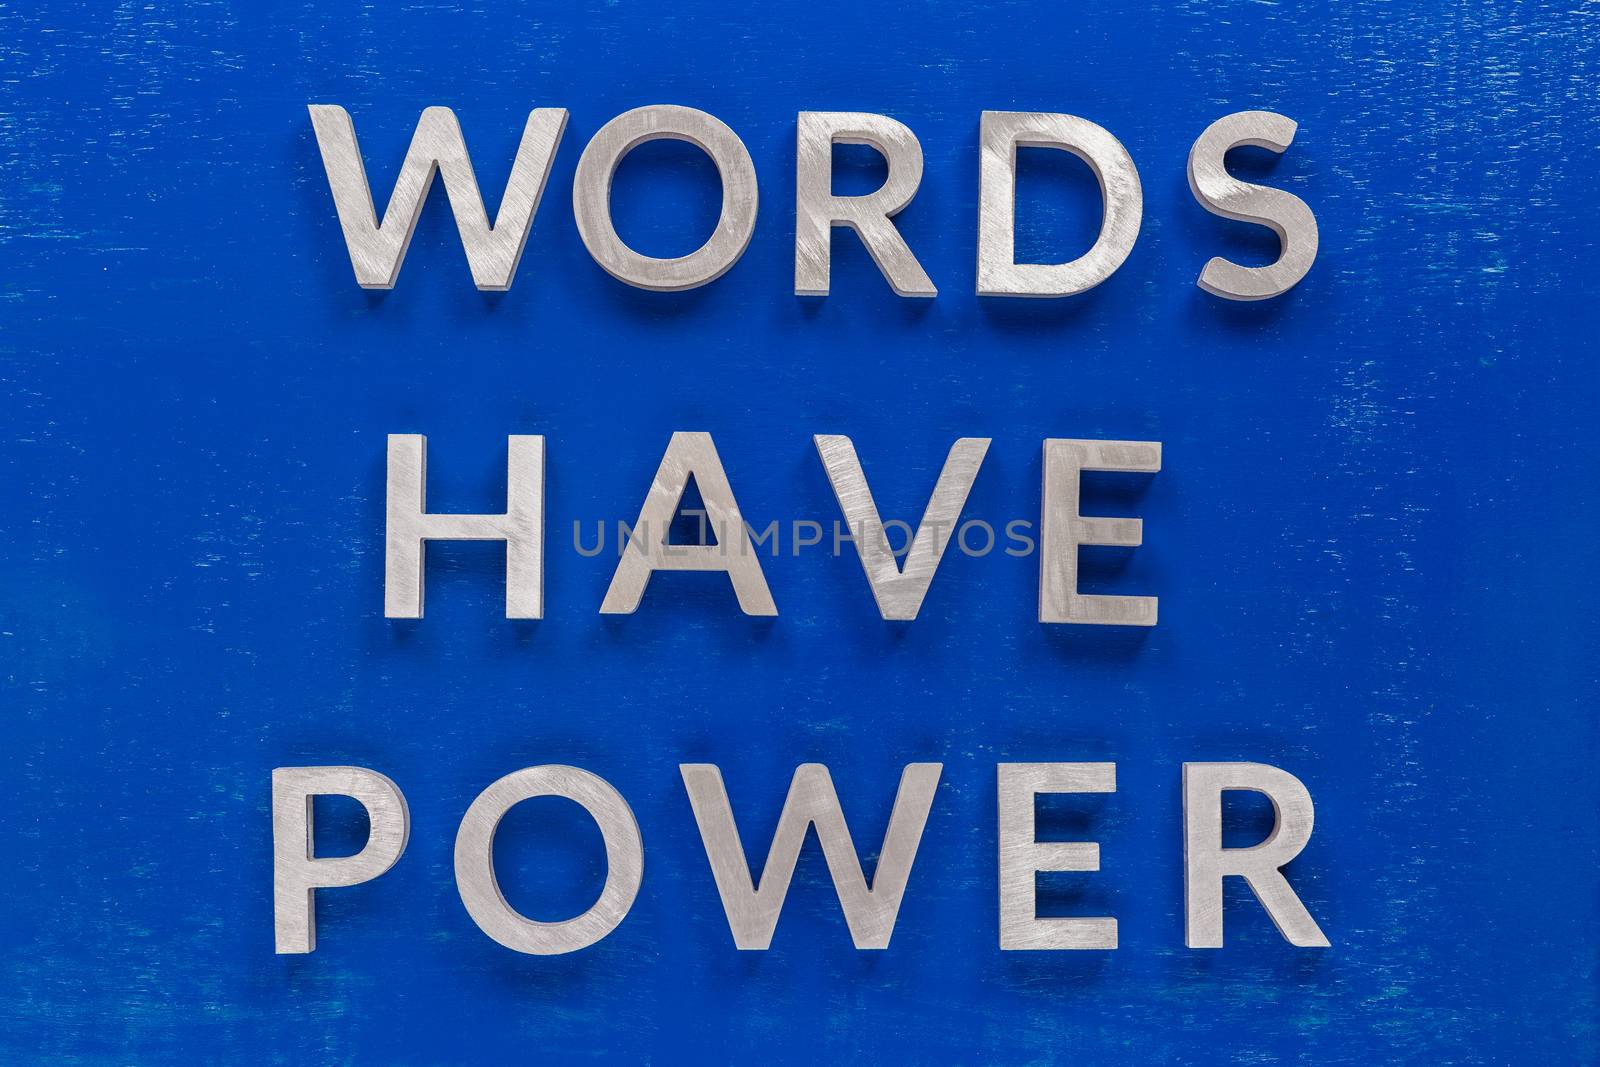 The phrase words have power laid on blue painted board with thick silver metal aphabet characters., centered composition concept